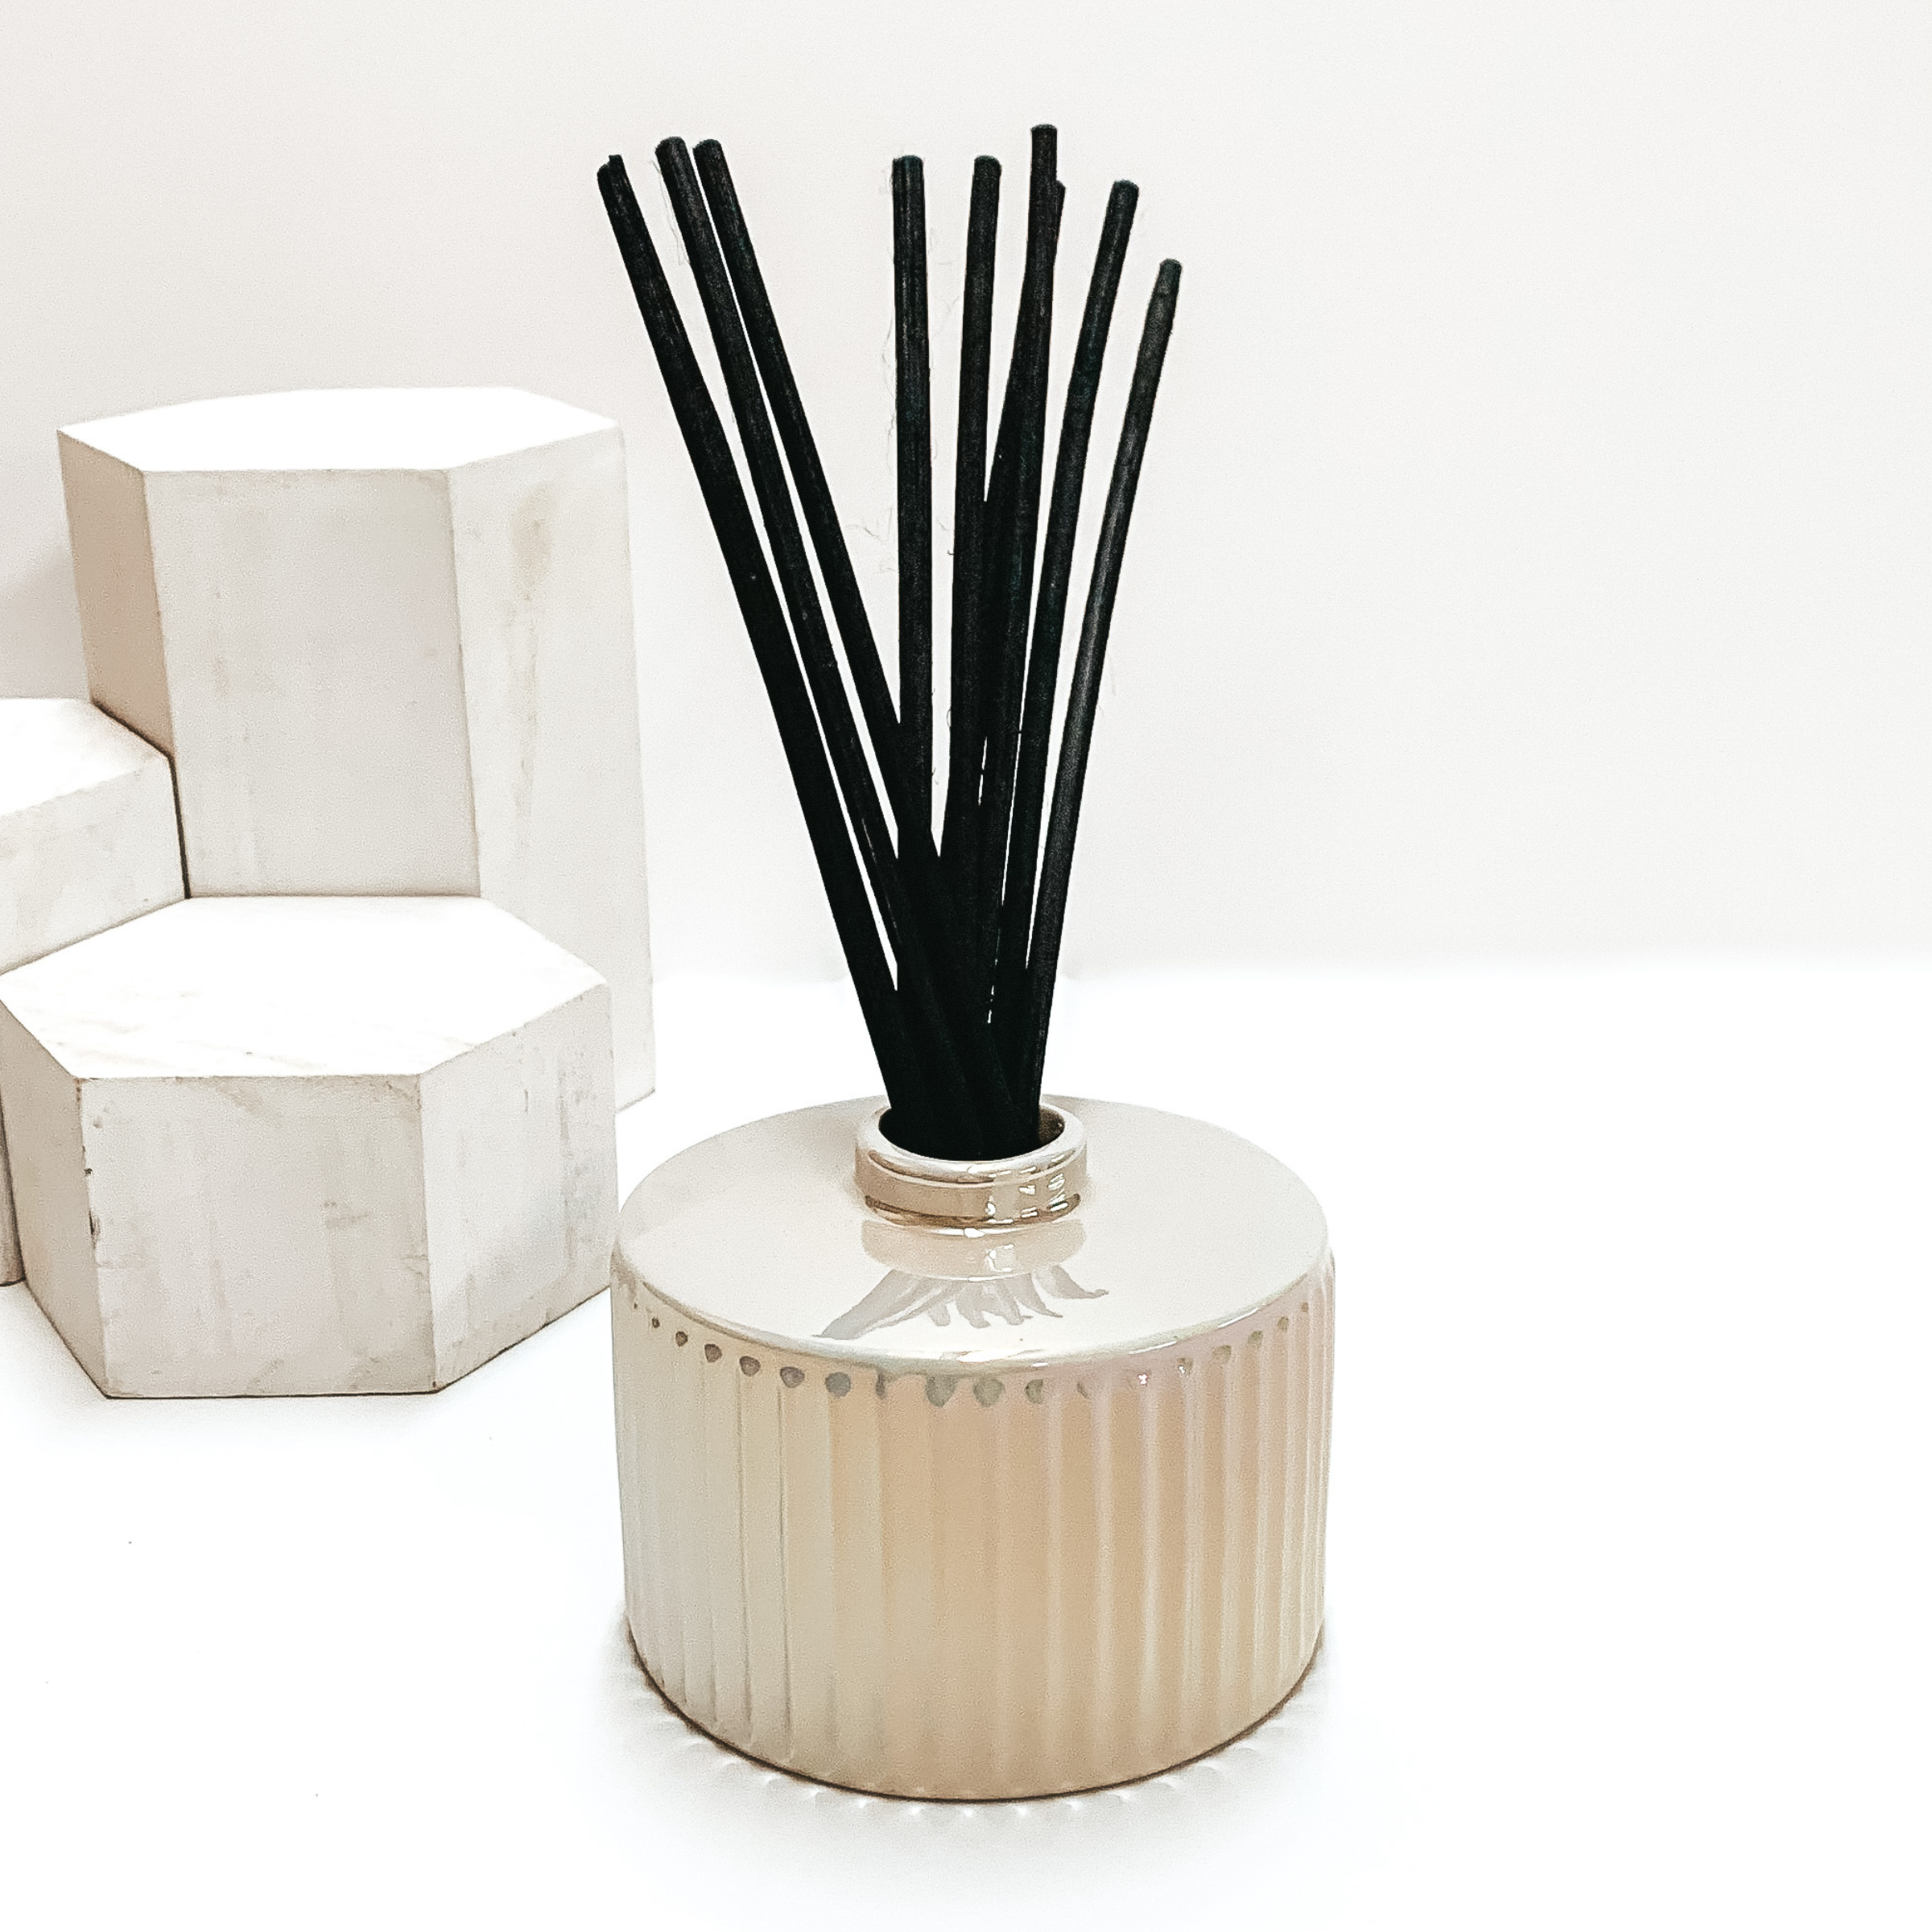 White opal diffuser holder with black reeds sticking out of the top. This diffuser is pictured on a white background with white blocks on the left side of the candle. 